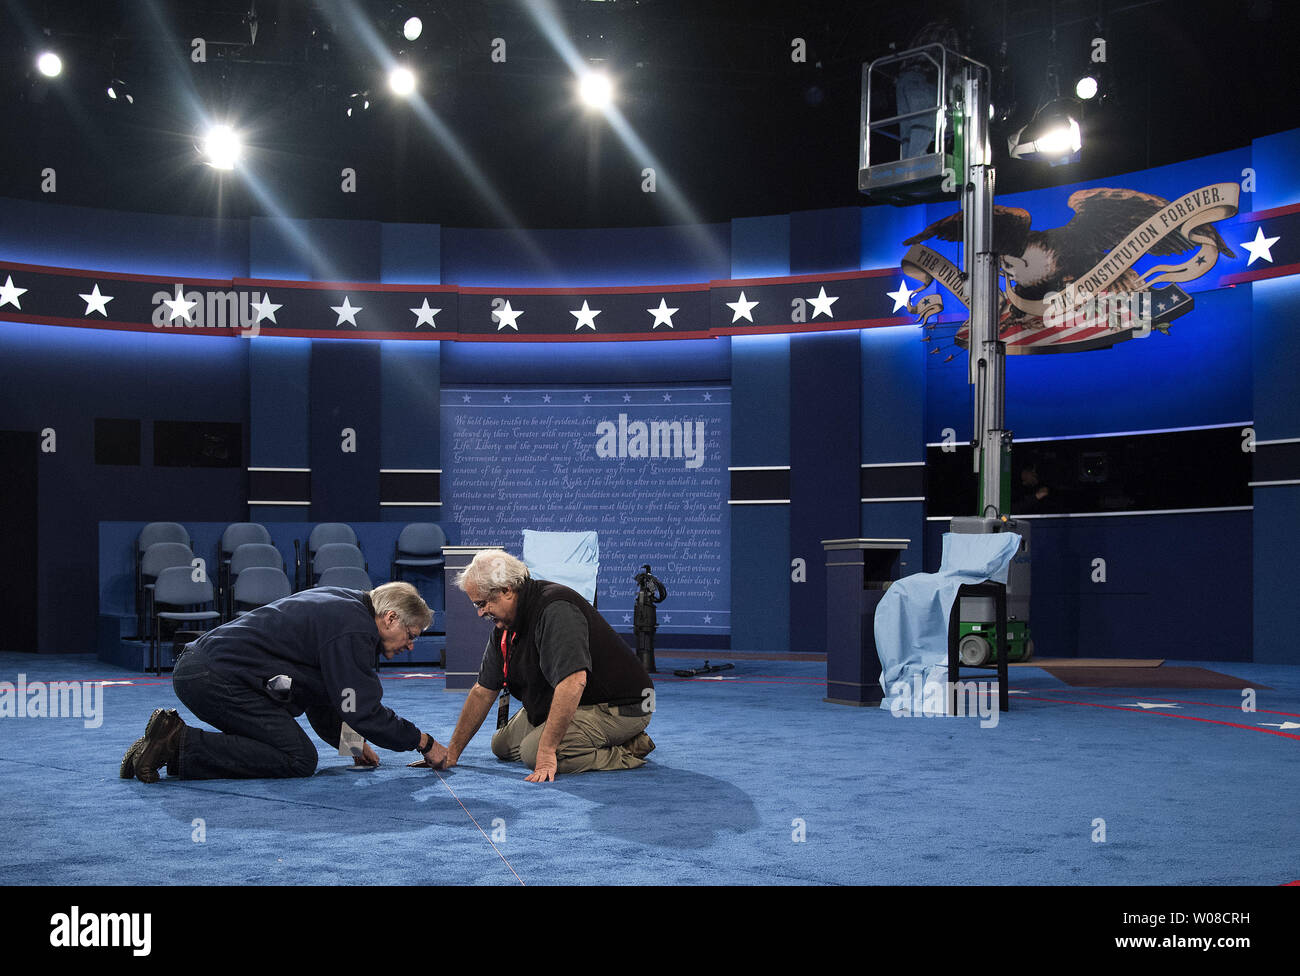 Set designer Michael Foley and set builder Peter Crawford work int he debate hall in preparation for the Presidential debate between Democratic candidate Hillary Clinton and Republican candidate Donald Trump, at Washington University in St. Louis on October 8, 2016. Clinton and Trump will face off tomorrow night in the second to last Presidential debate. Photo by Kevin Dietsch/UPI Stock Photo